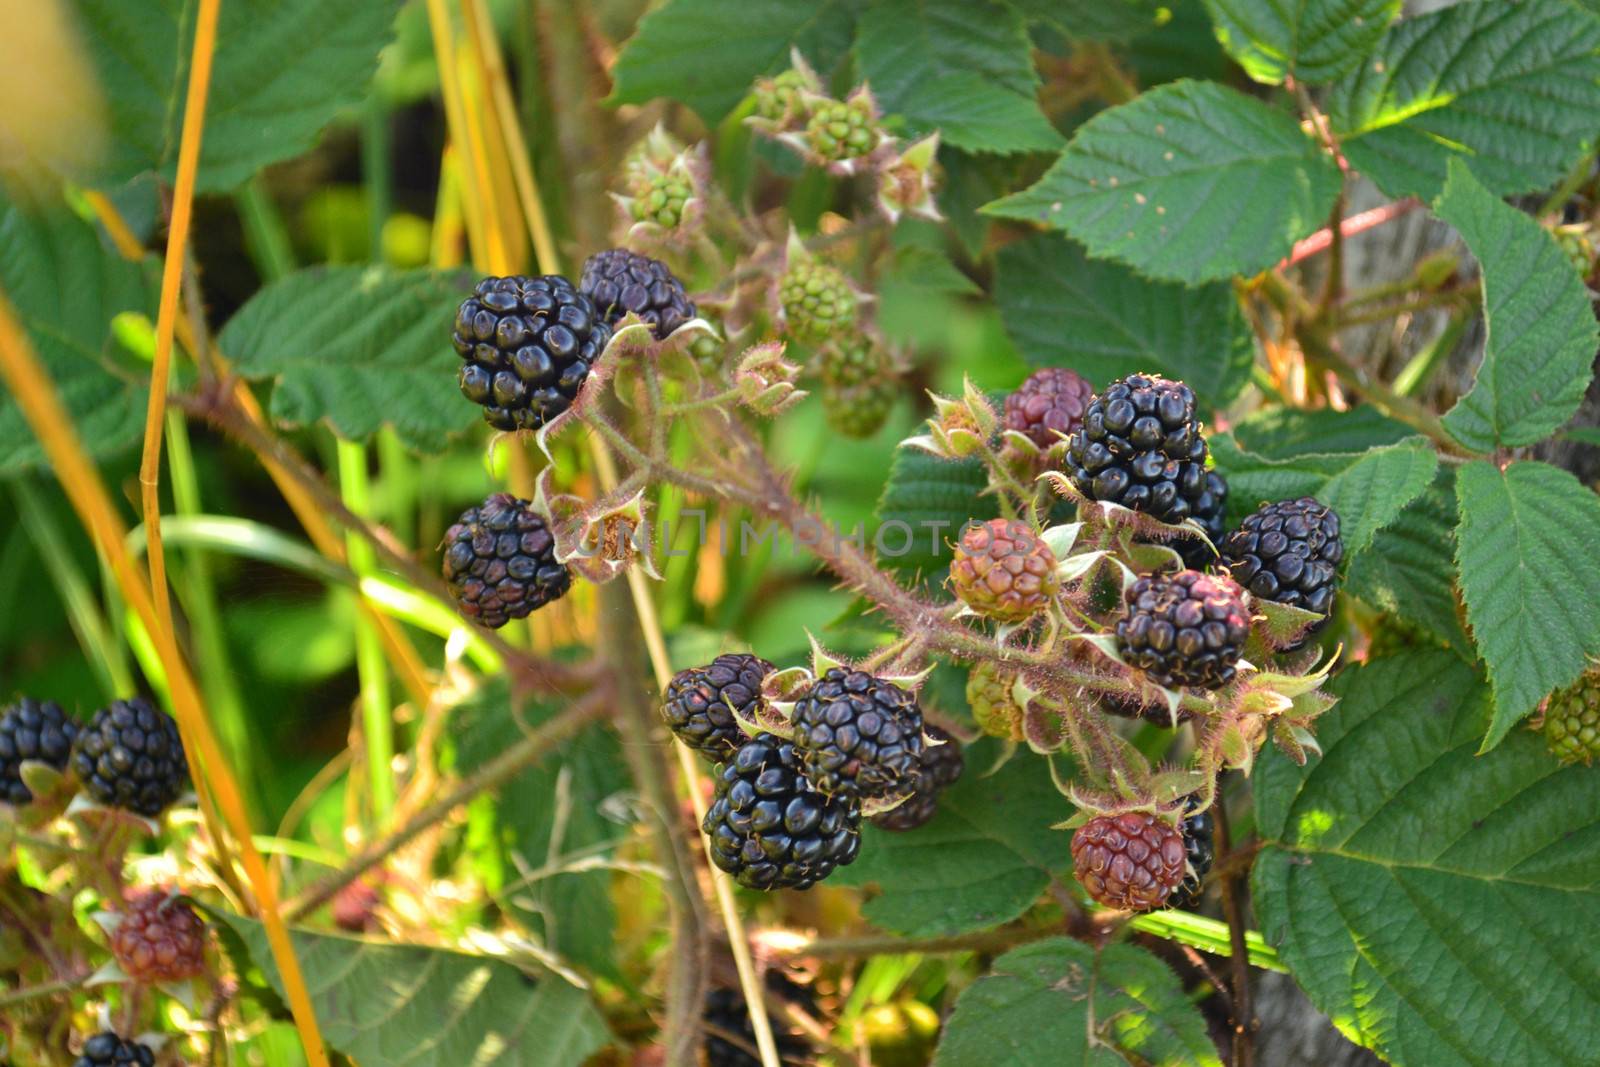 blackberries on a branch with leaves